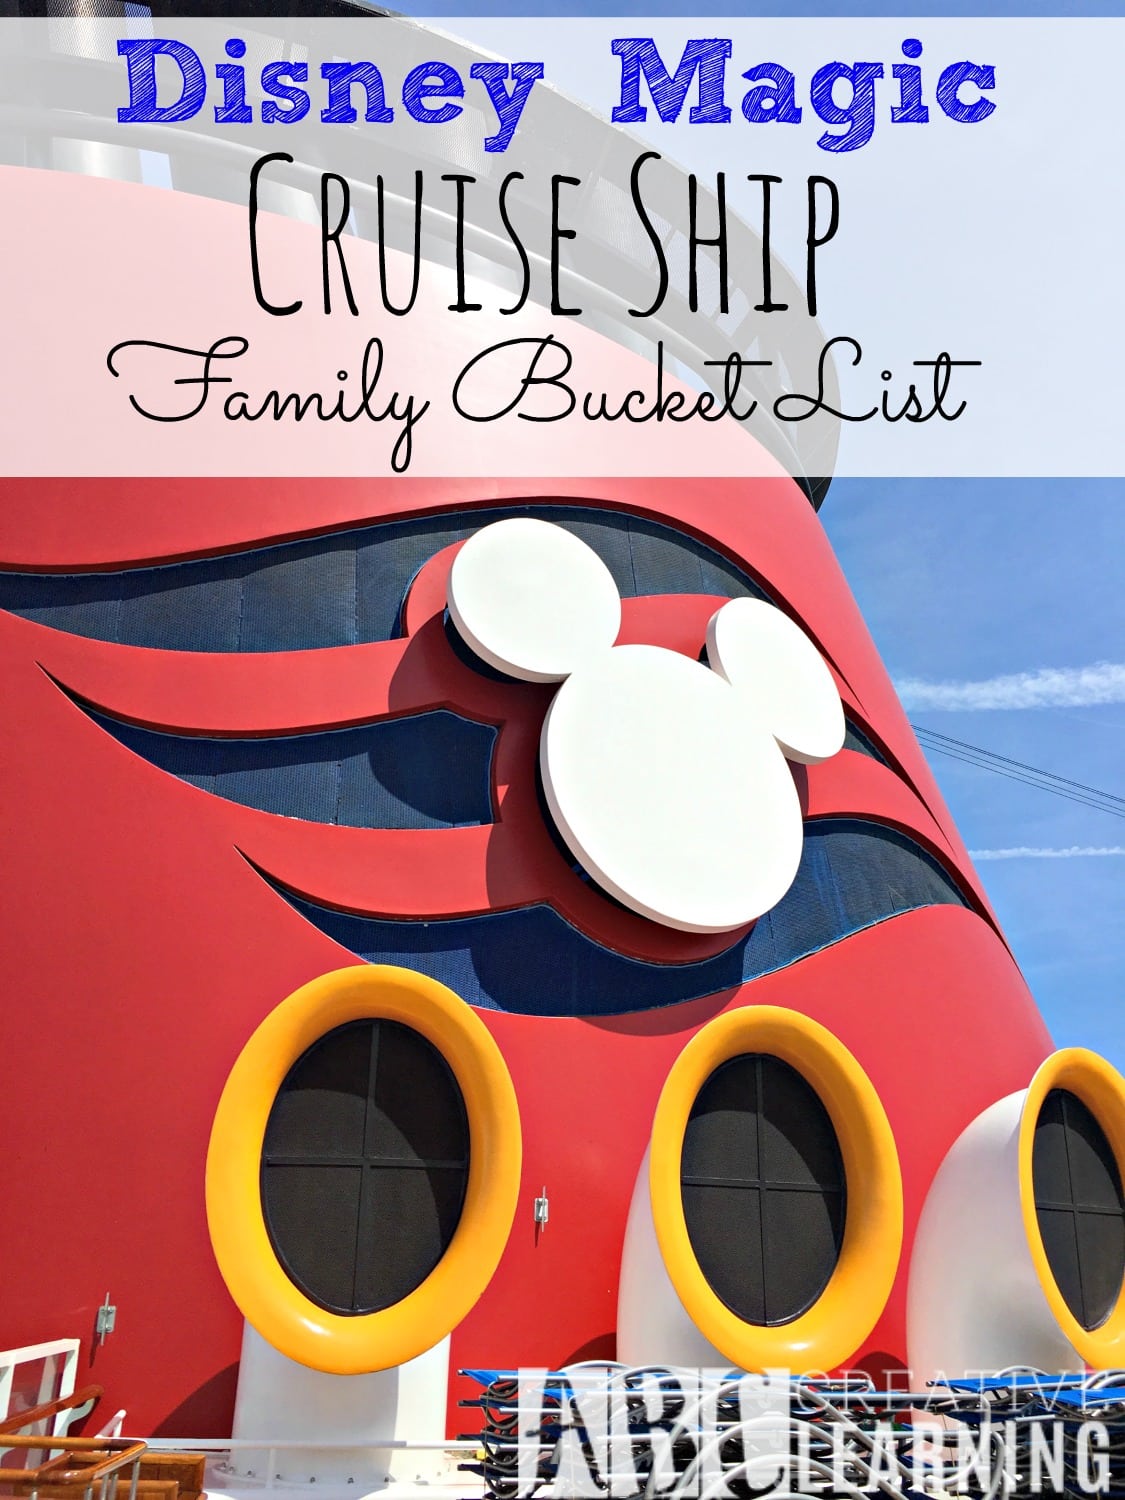 Reasons Why The Disney Magic Cruise Ship Is On Our Family Bucket List - simplytodaylife.com